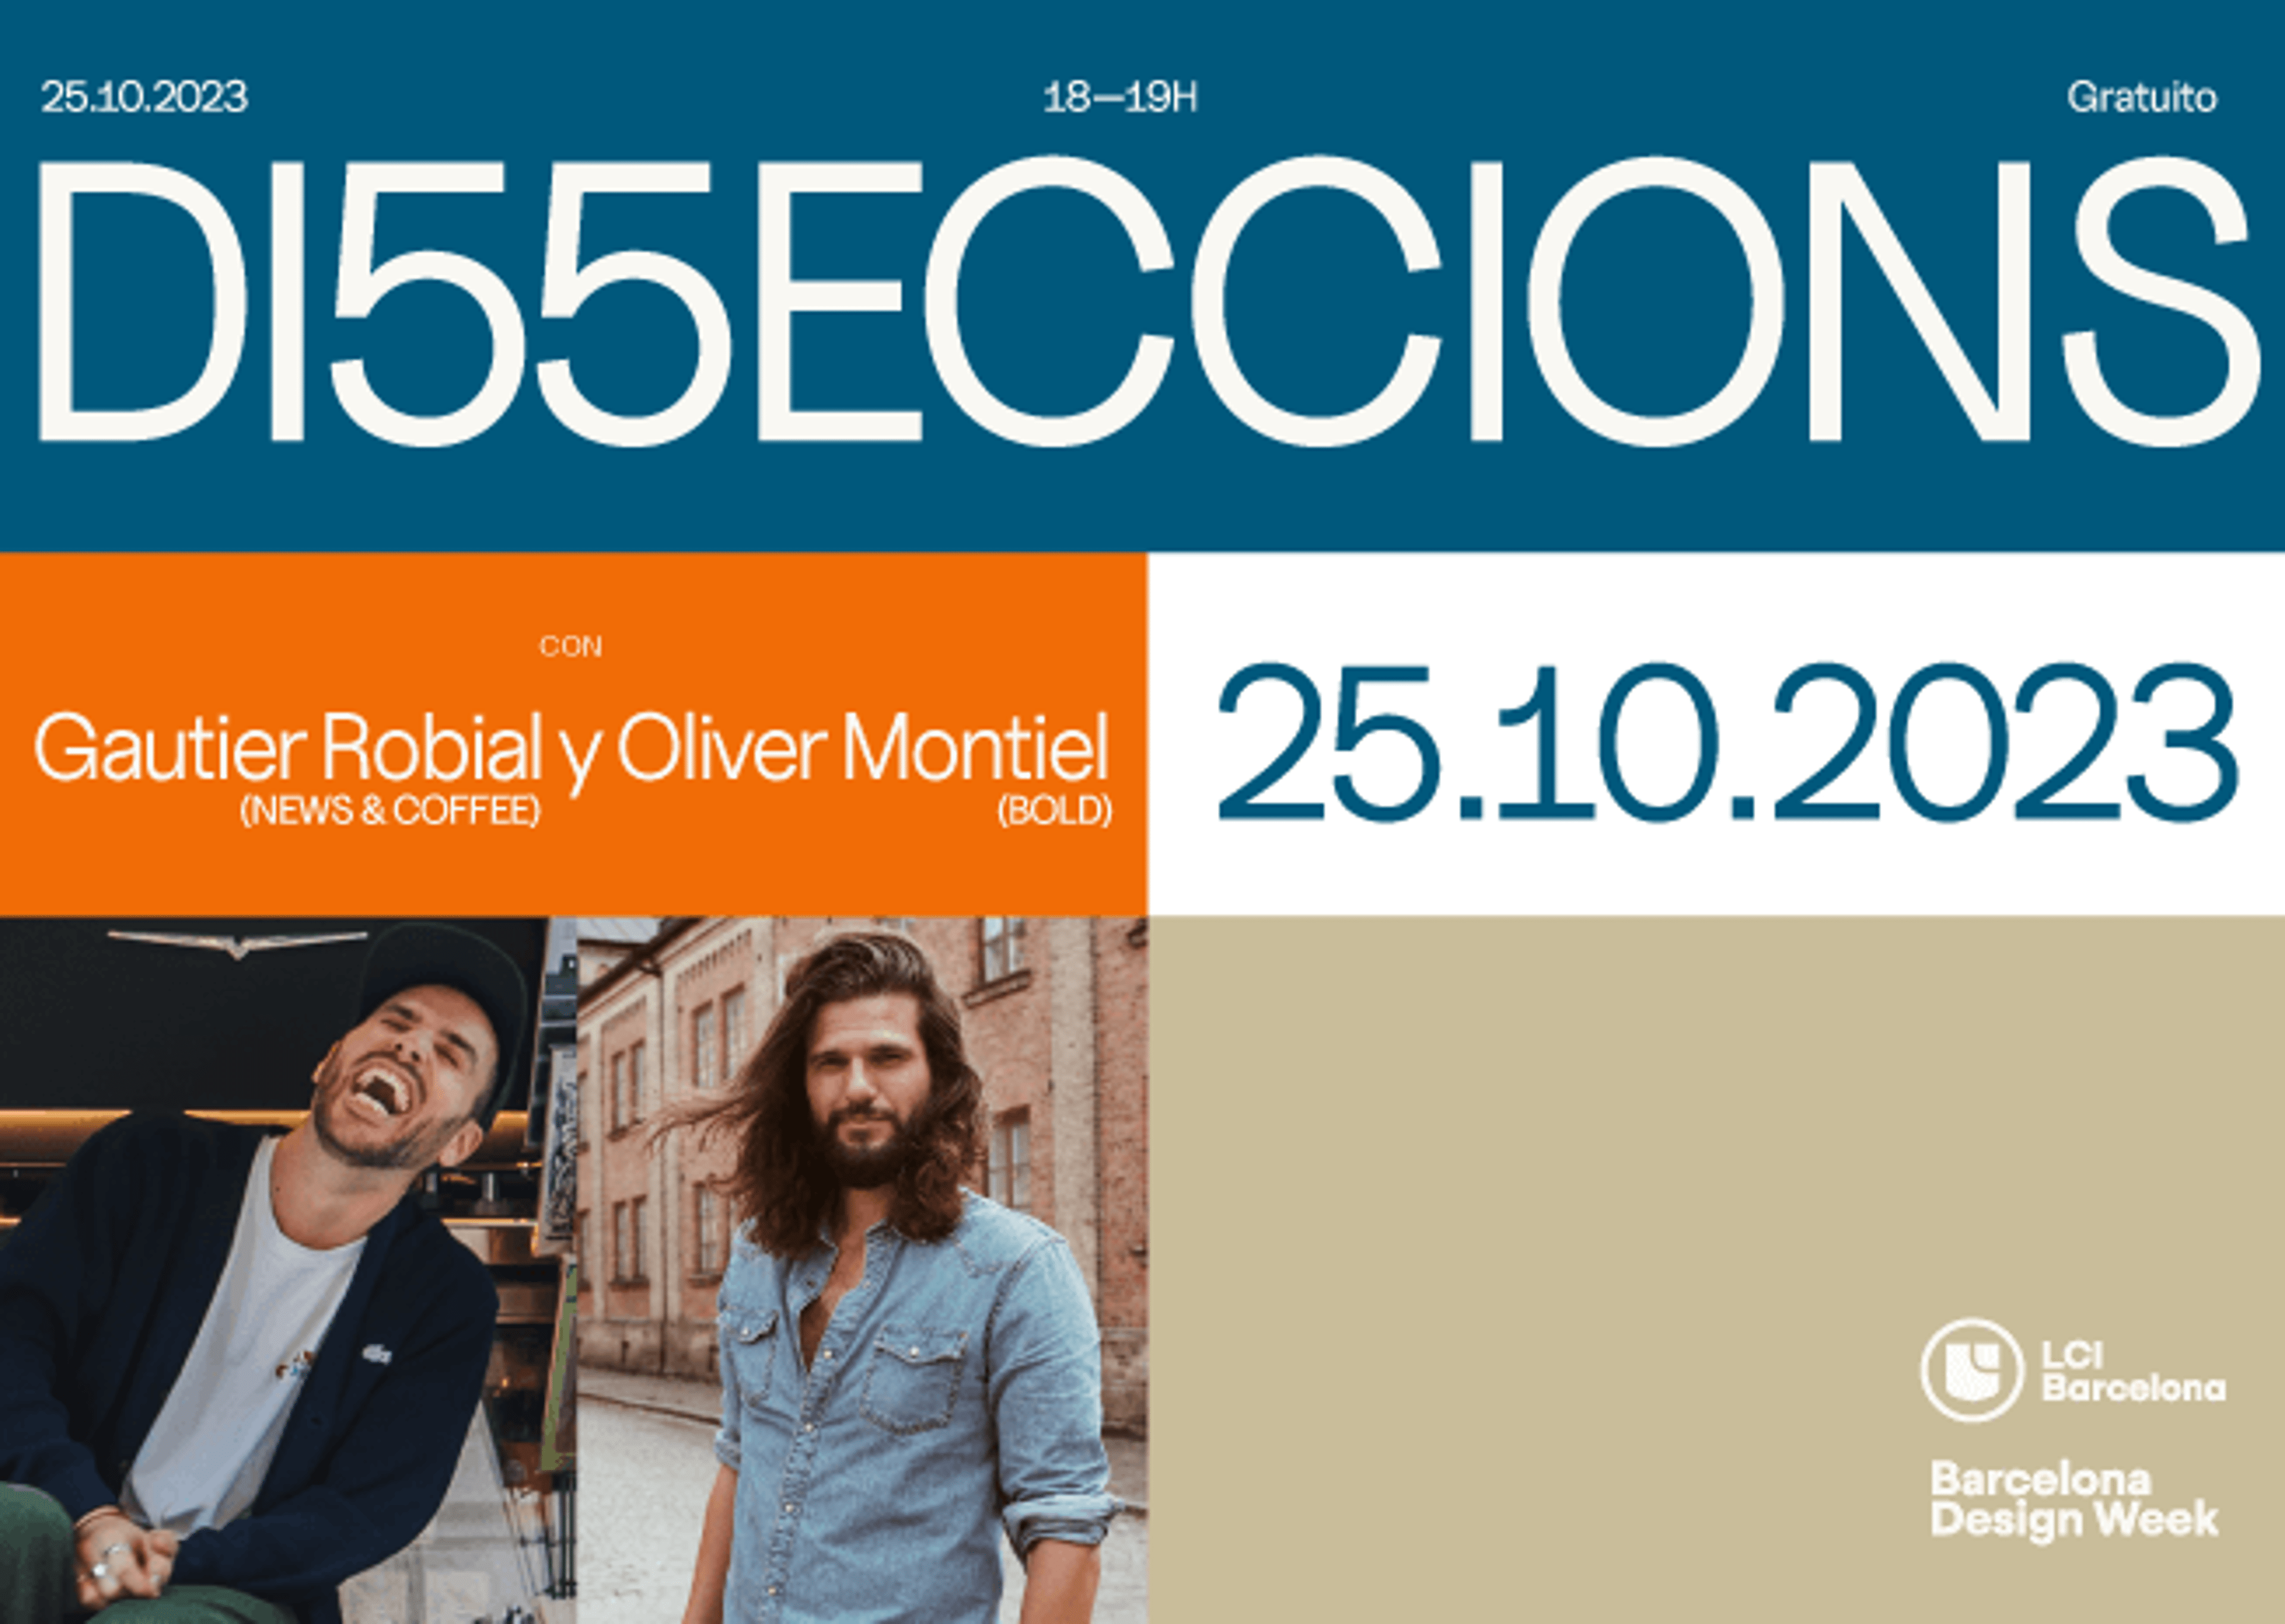 Flyer for 'D15ECCIONS' on 25.10.2023, featuring speakers Gautier Robial and Oliver Montiel, part of Barcelona Design Week.